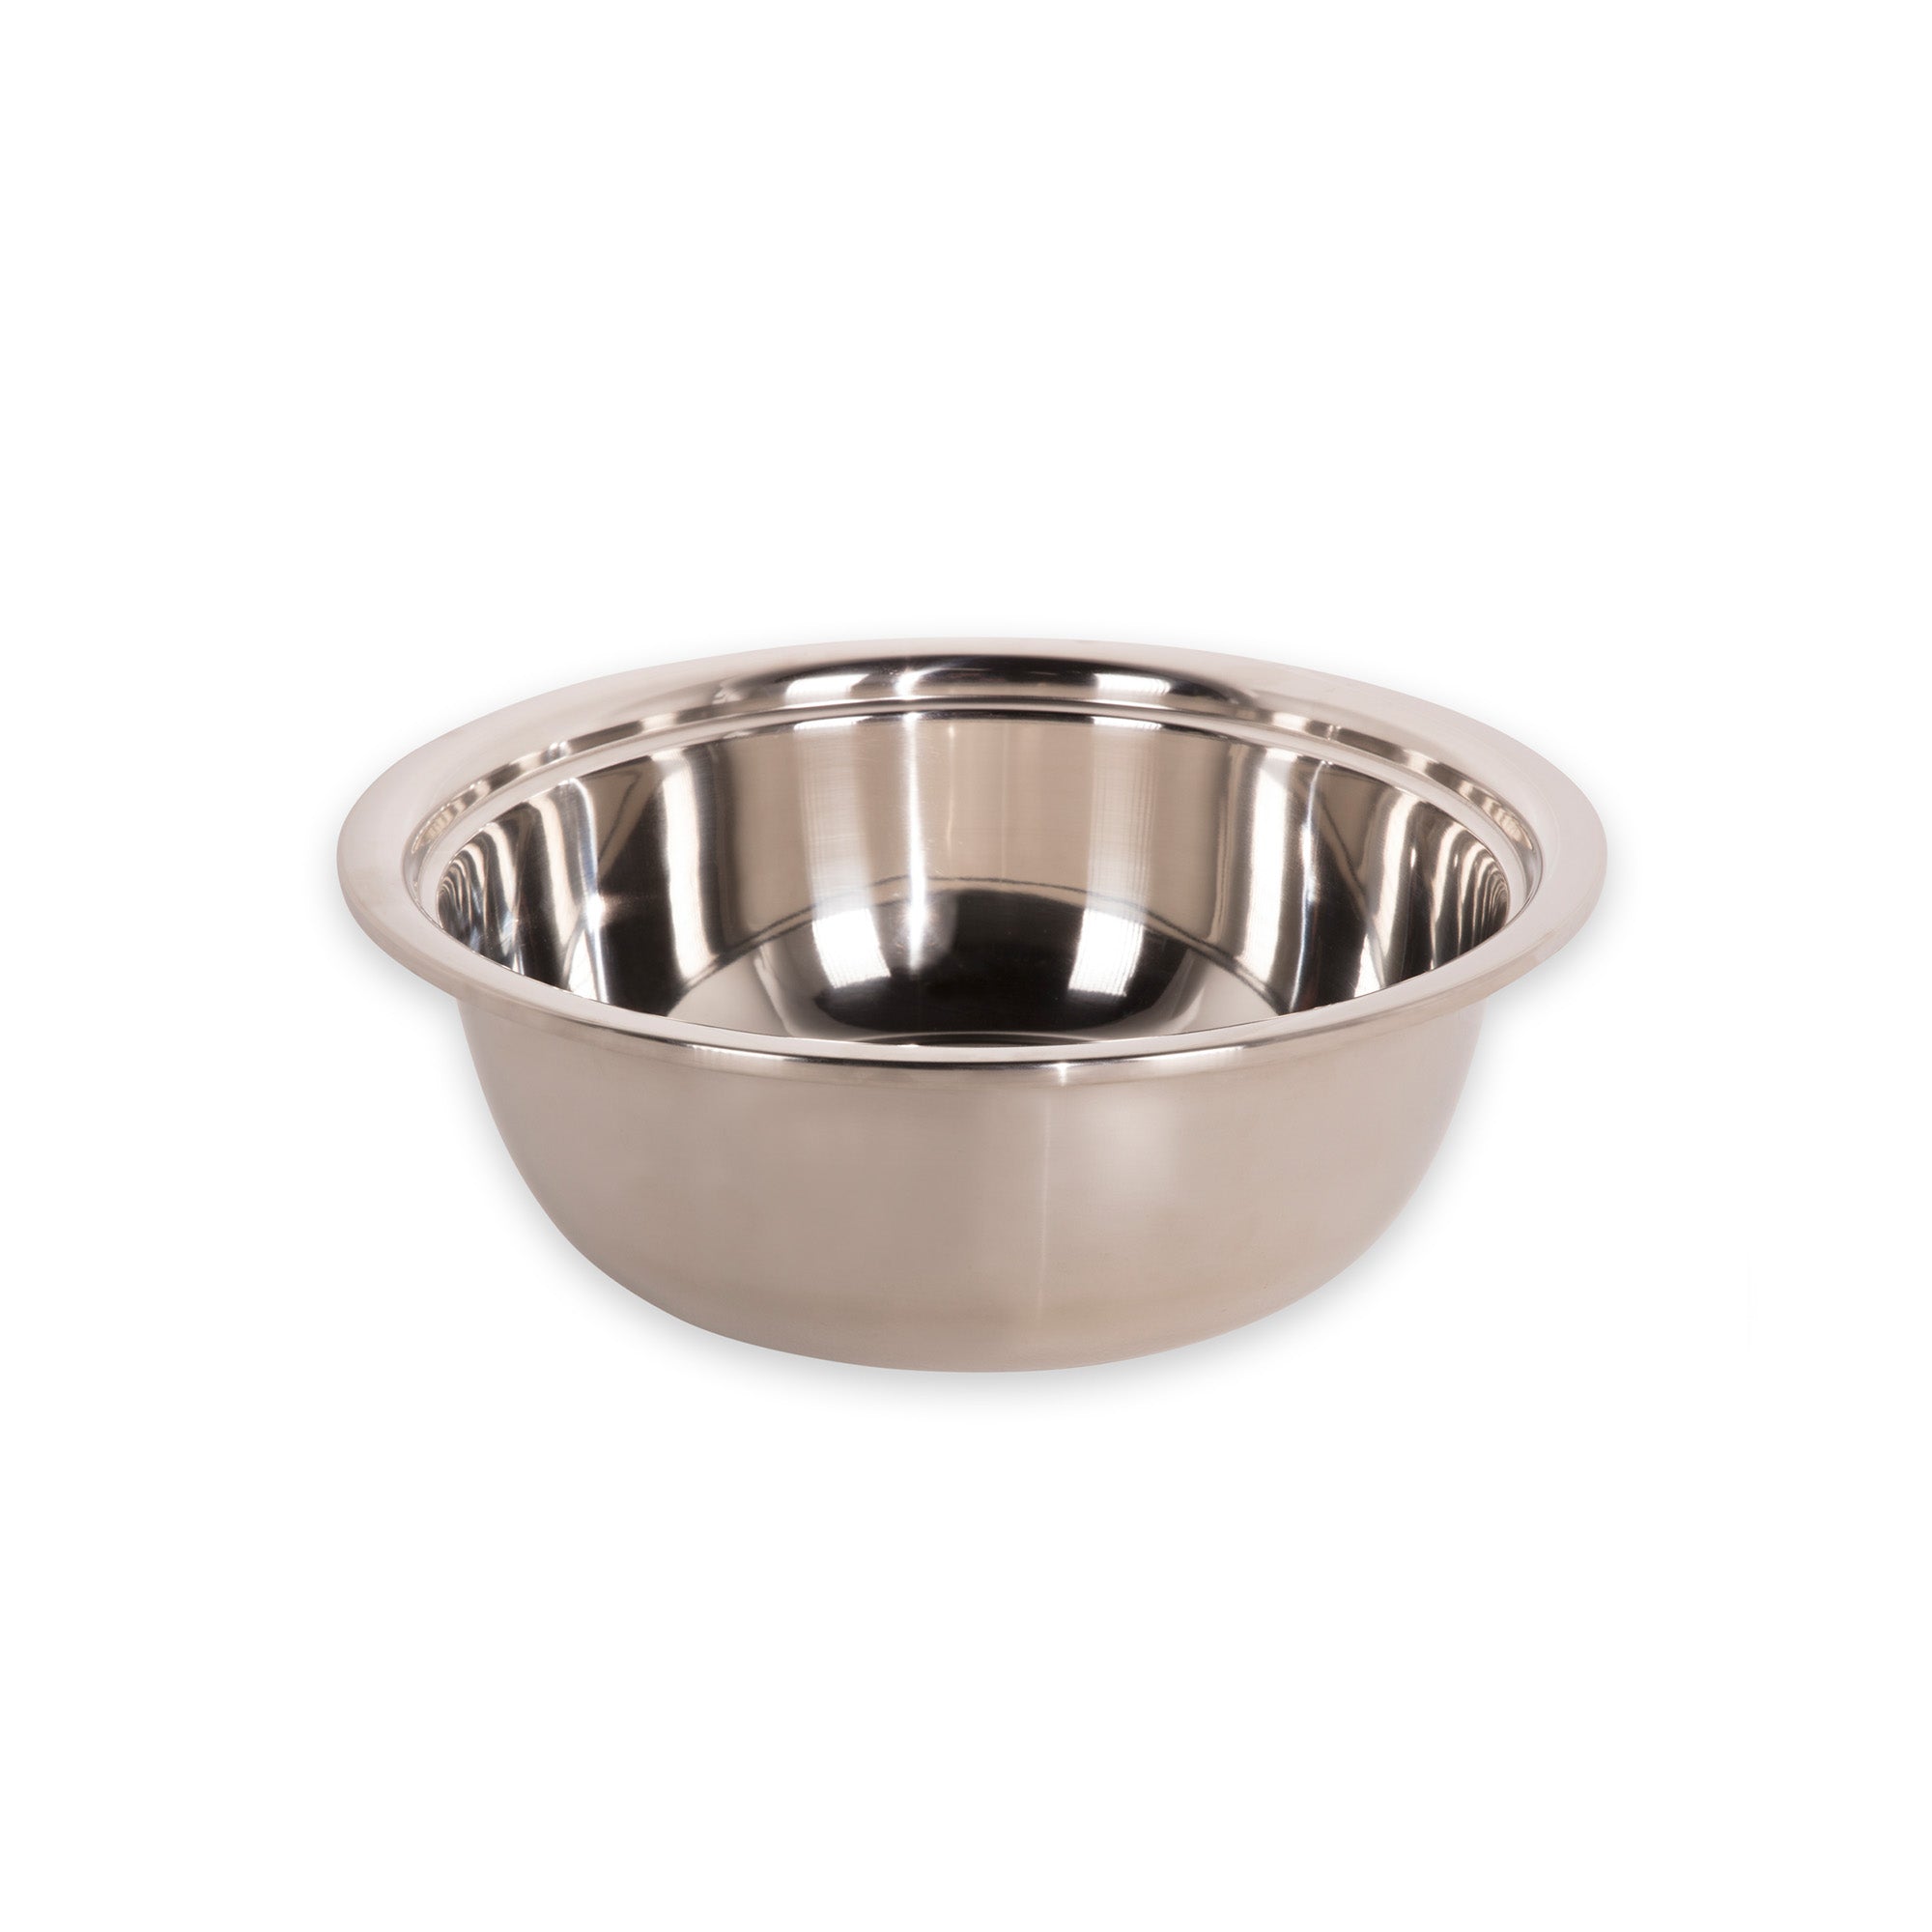 Pedicure Bowl-Stainless Steel - Collins - Salon Equipment and Barber Equipment